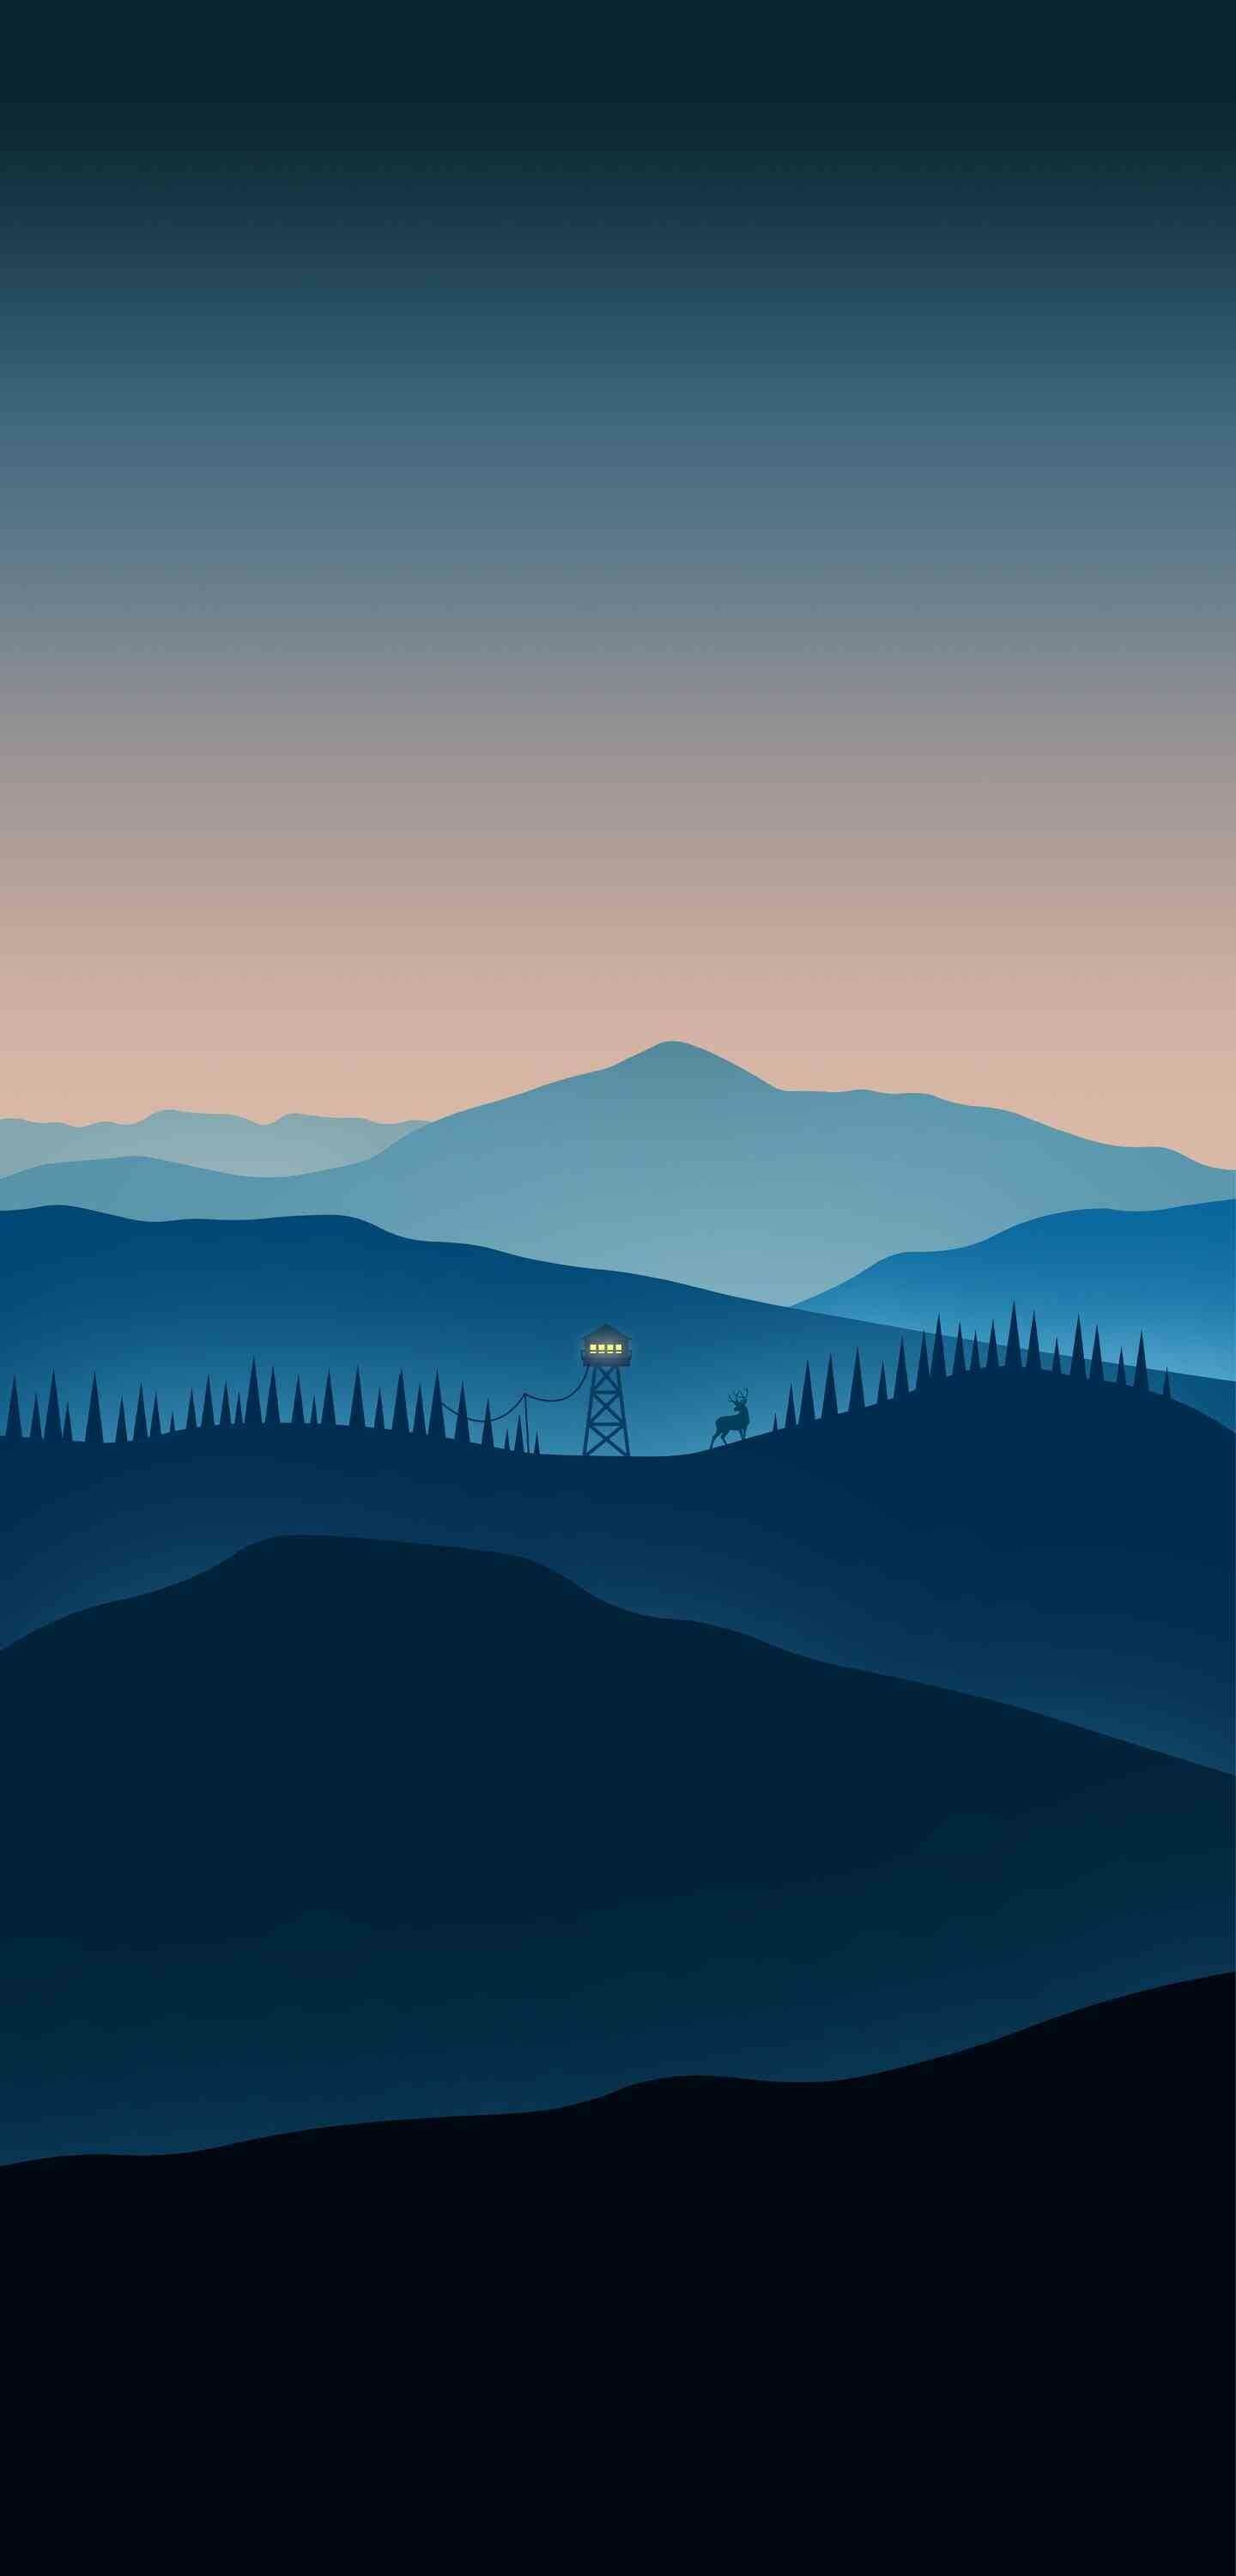 Firewatch: Through exploration of the surrounding area, Henry uncovers clues about mysterious occurrences in the vicinity that are related to the ransacking of his tower while he is out on a routine patrol and a shadowy figure that occasionally appears watching him. 1440x3000 HD Background.